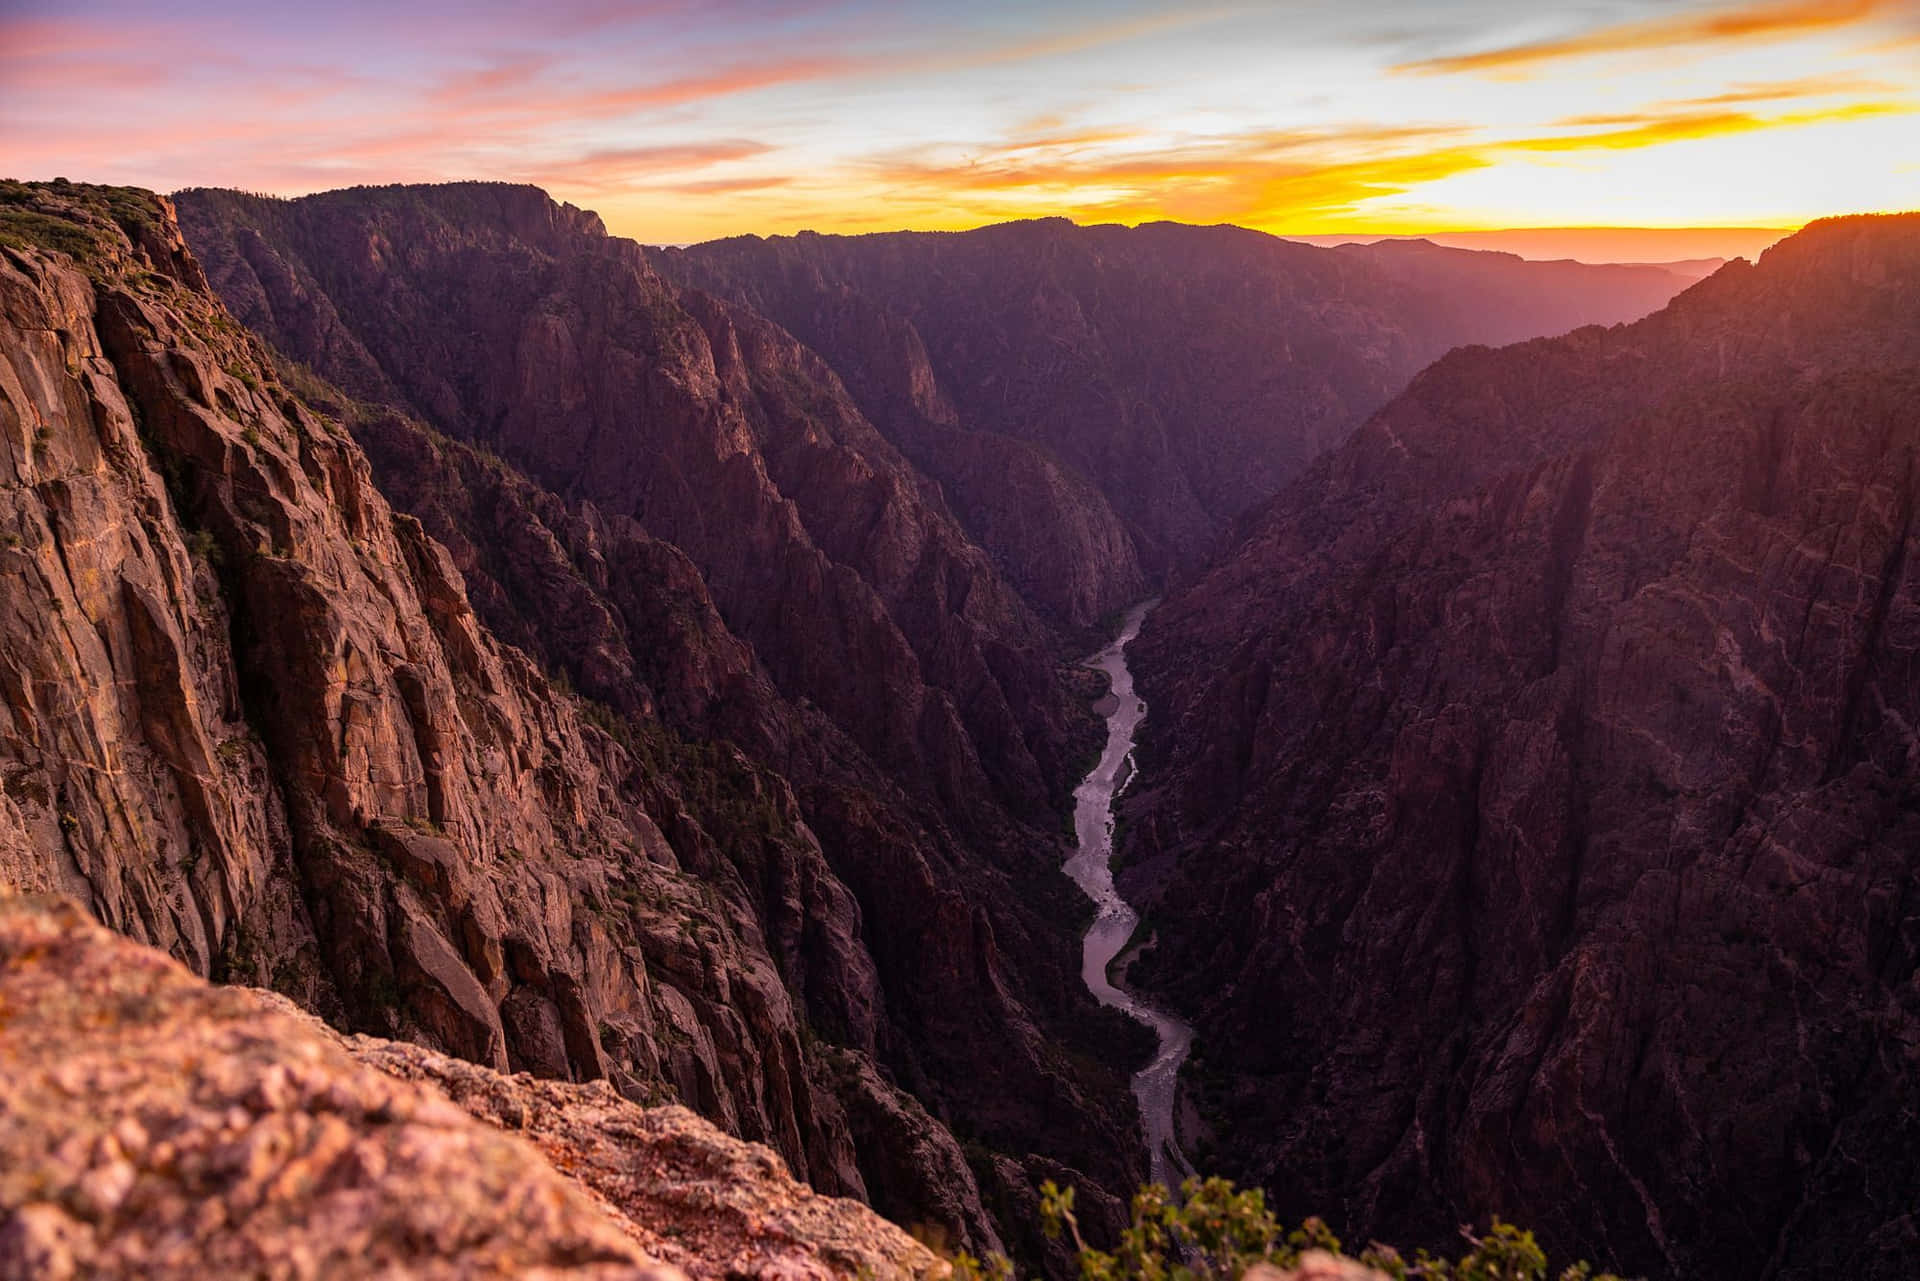 "Beauty of the Black Canyon in Colorado" Wallpaper